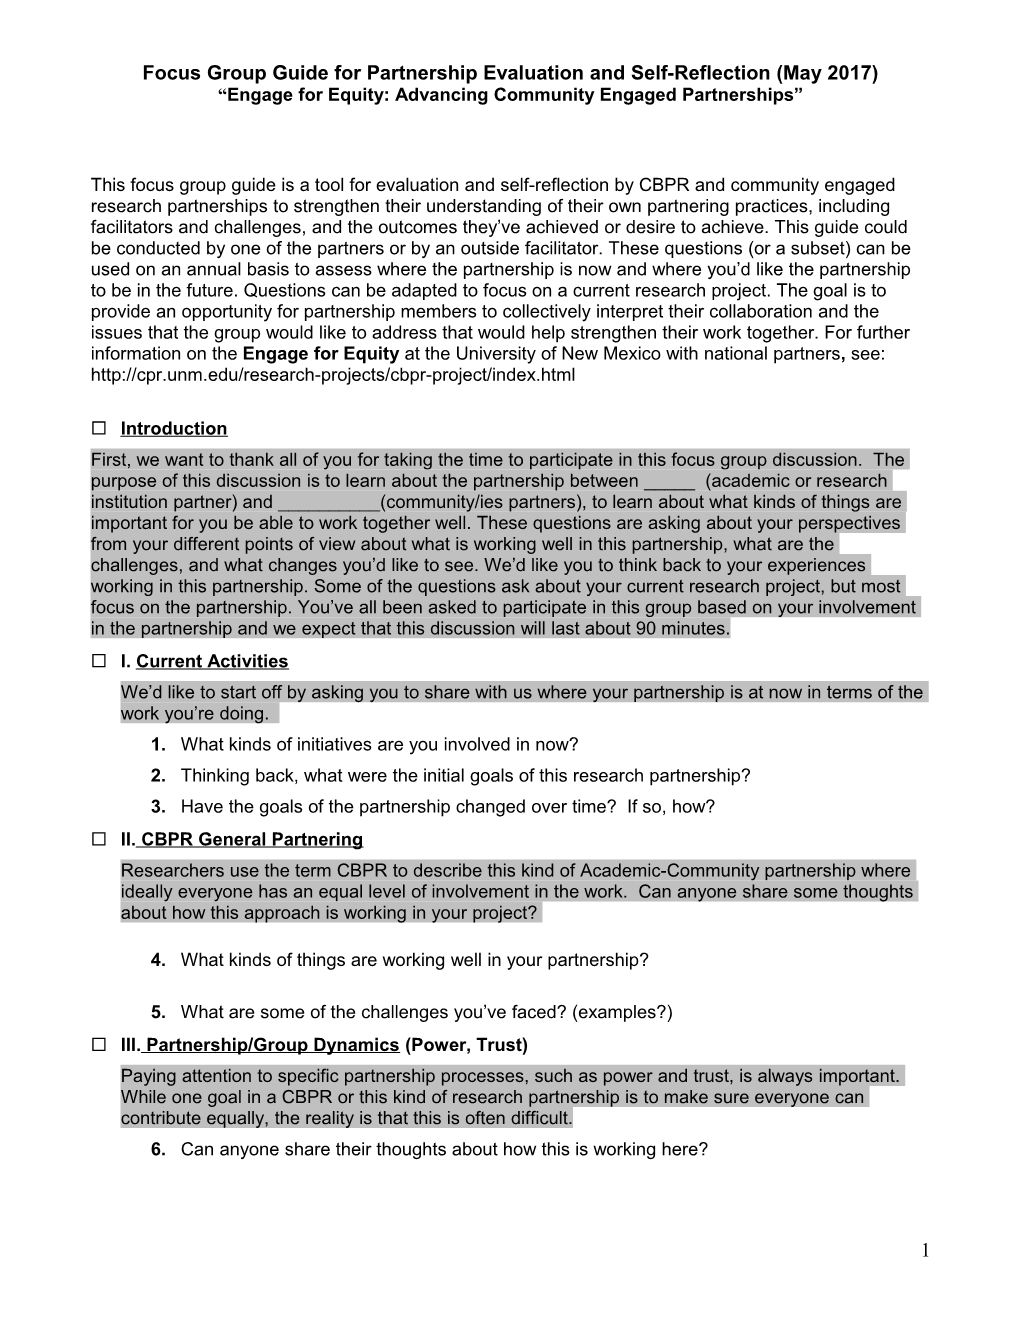 Focus Group Interview Guide (Draft)